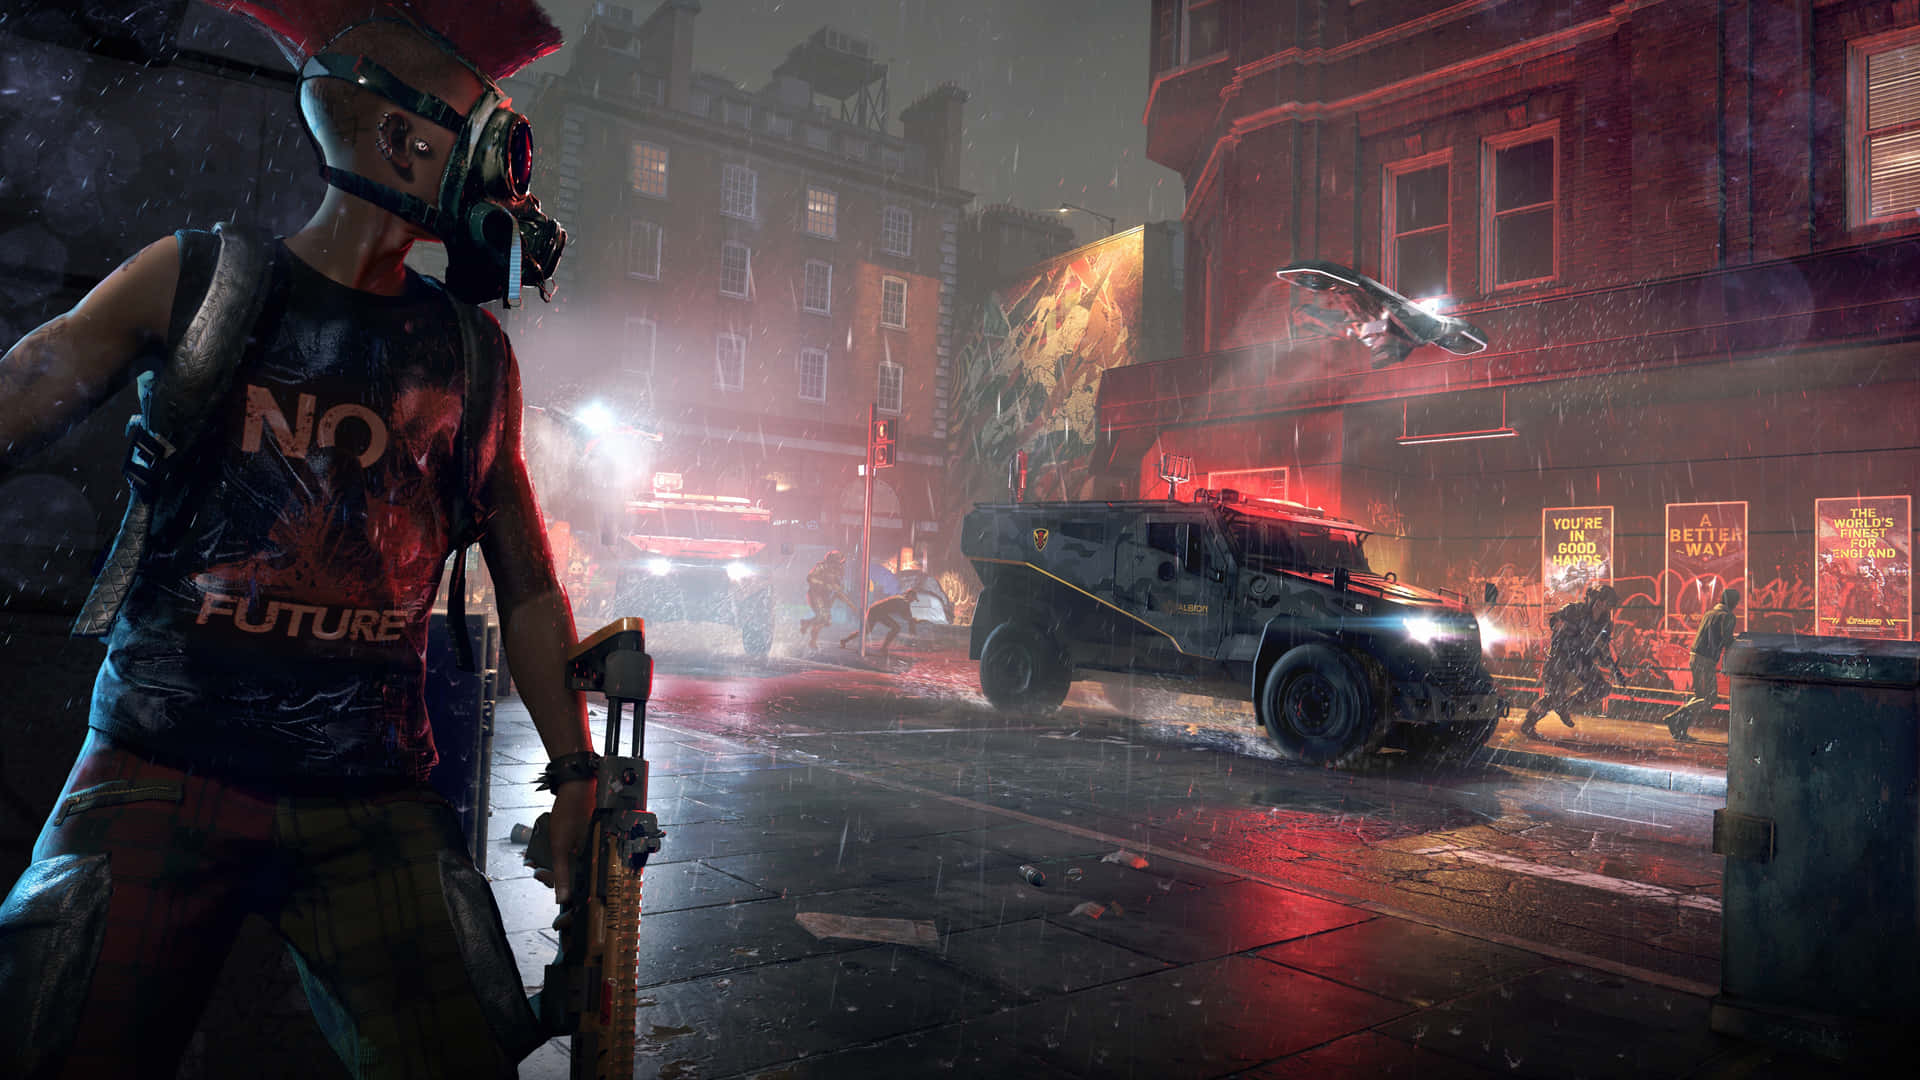 Watch_Dogs_2 - Play Watch Dogs and join the epic missions Wallpaper